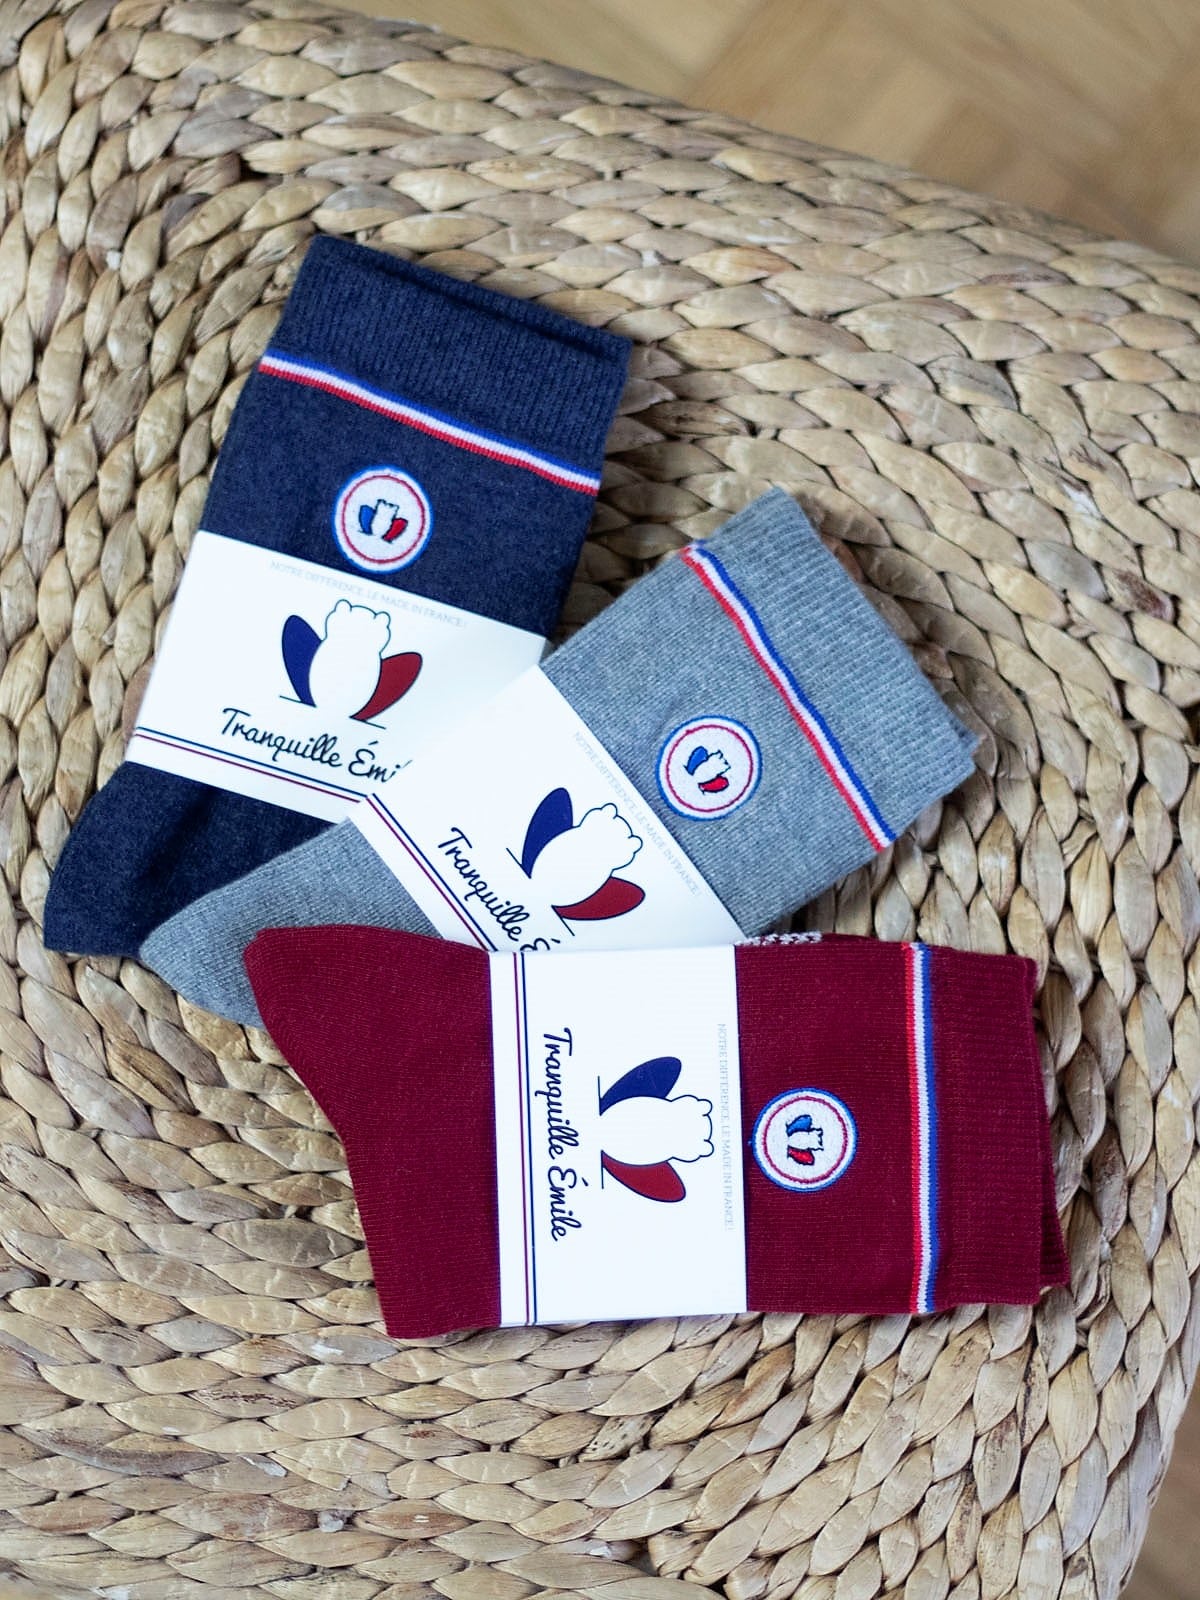 chaussettes-made-in-france-tranquille-emile-les-unies-pack-de-3-2